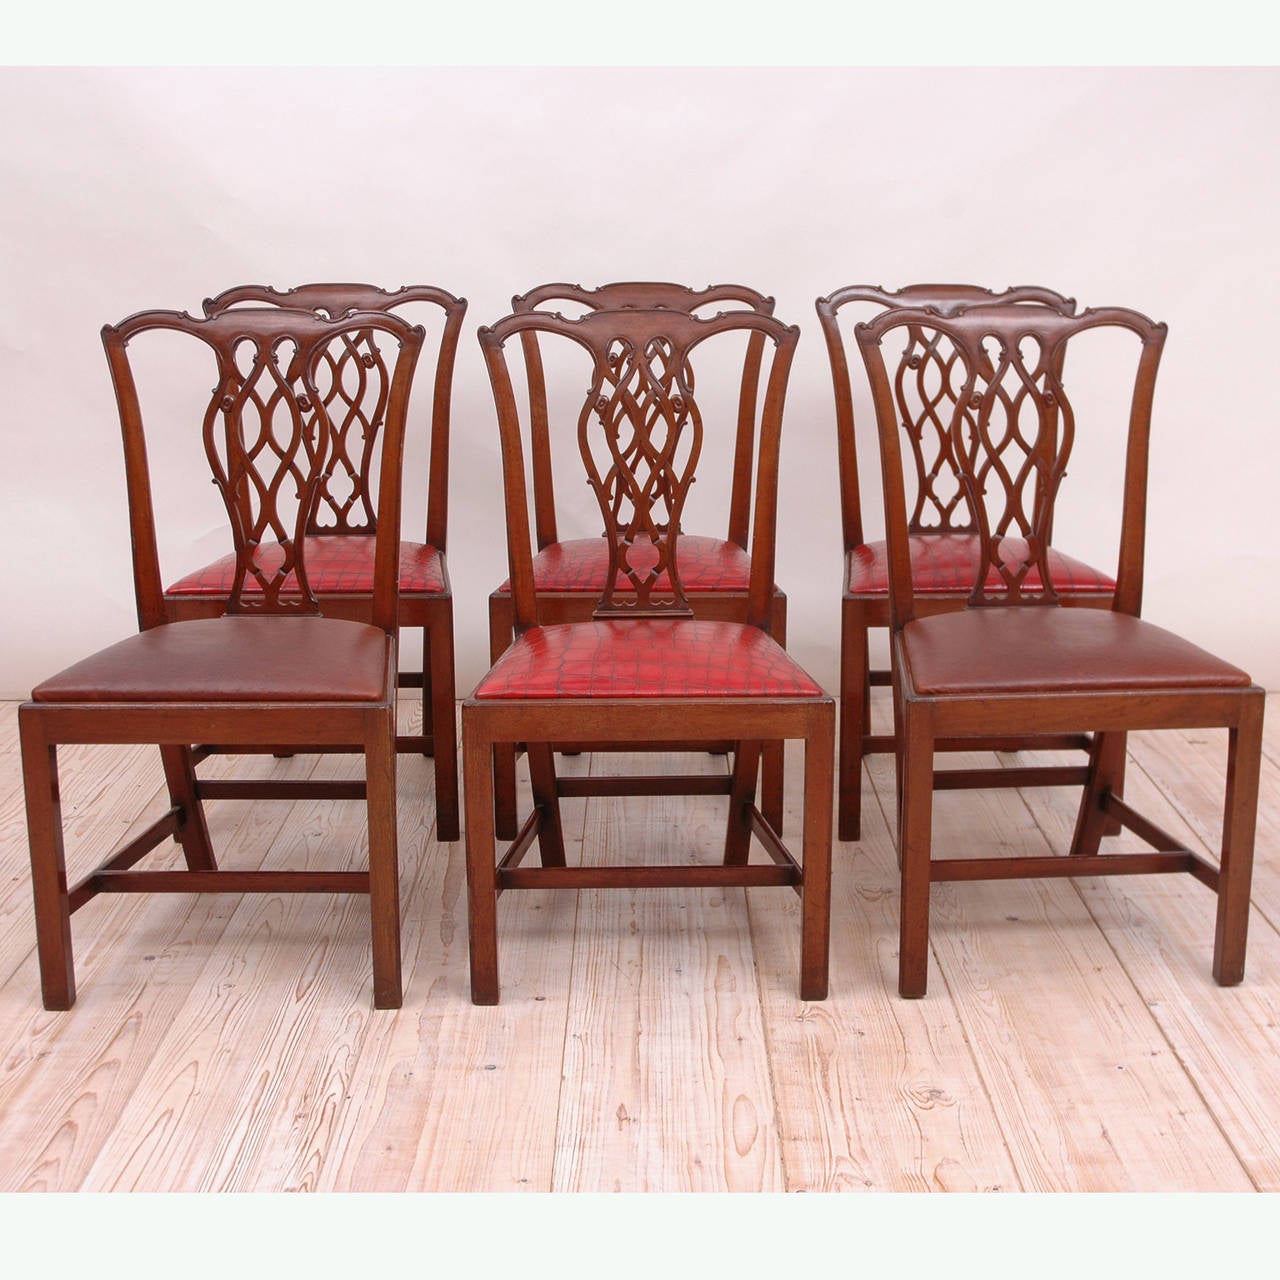 A good set of 19th century dining chairs in mahogany with serpentine crest rail, carved and pierced slat, Marlboro leg, box stretcher and drop-in upholstered seat. Two have been upholstered in brown ostrich leather and four in a fine red alligator